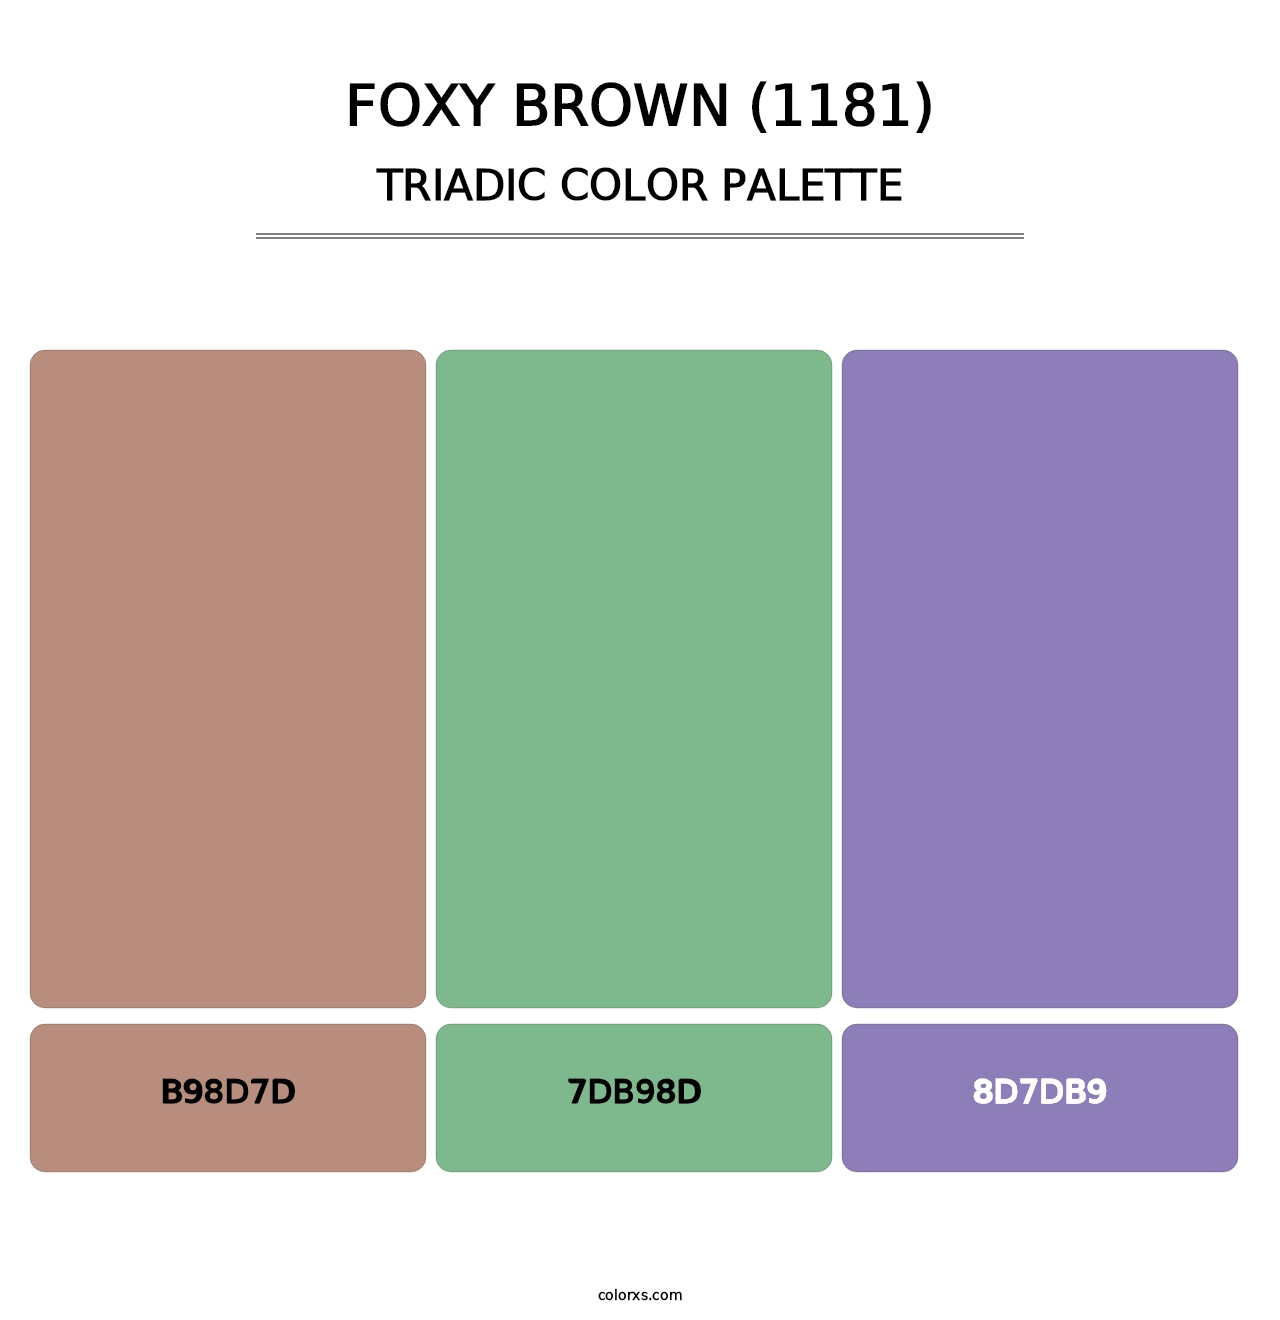 Foxy Brown (1181) - Triadic Color Palette